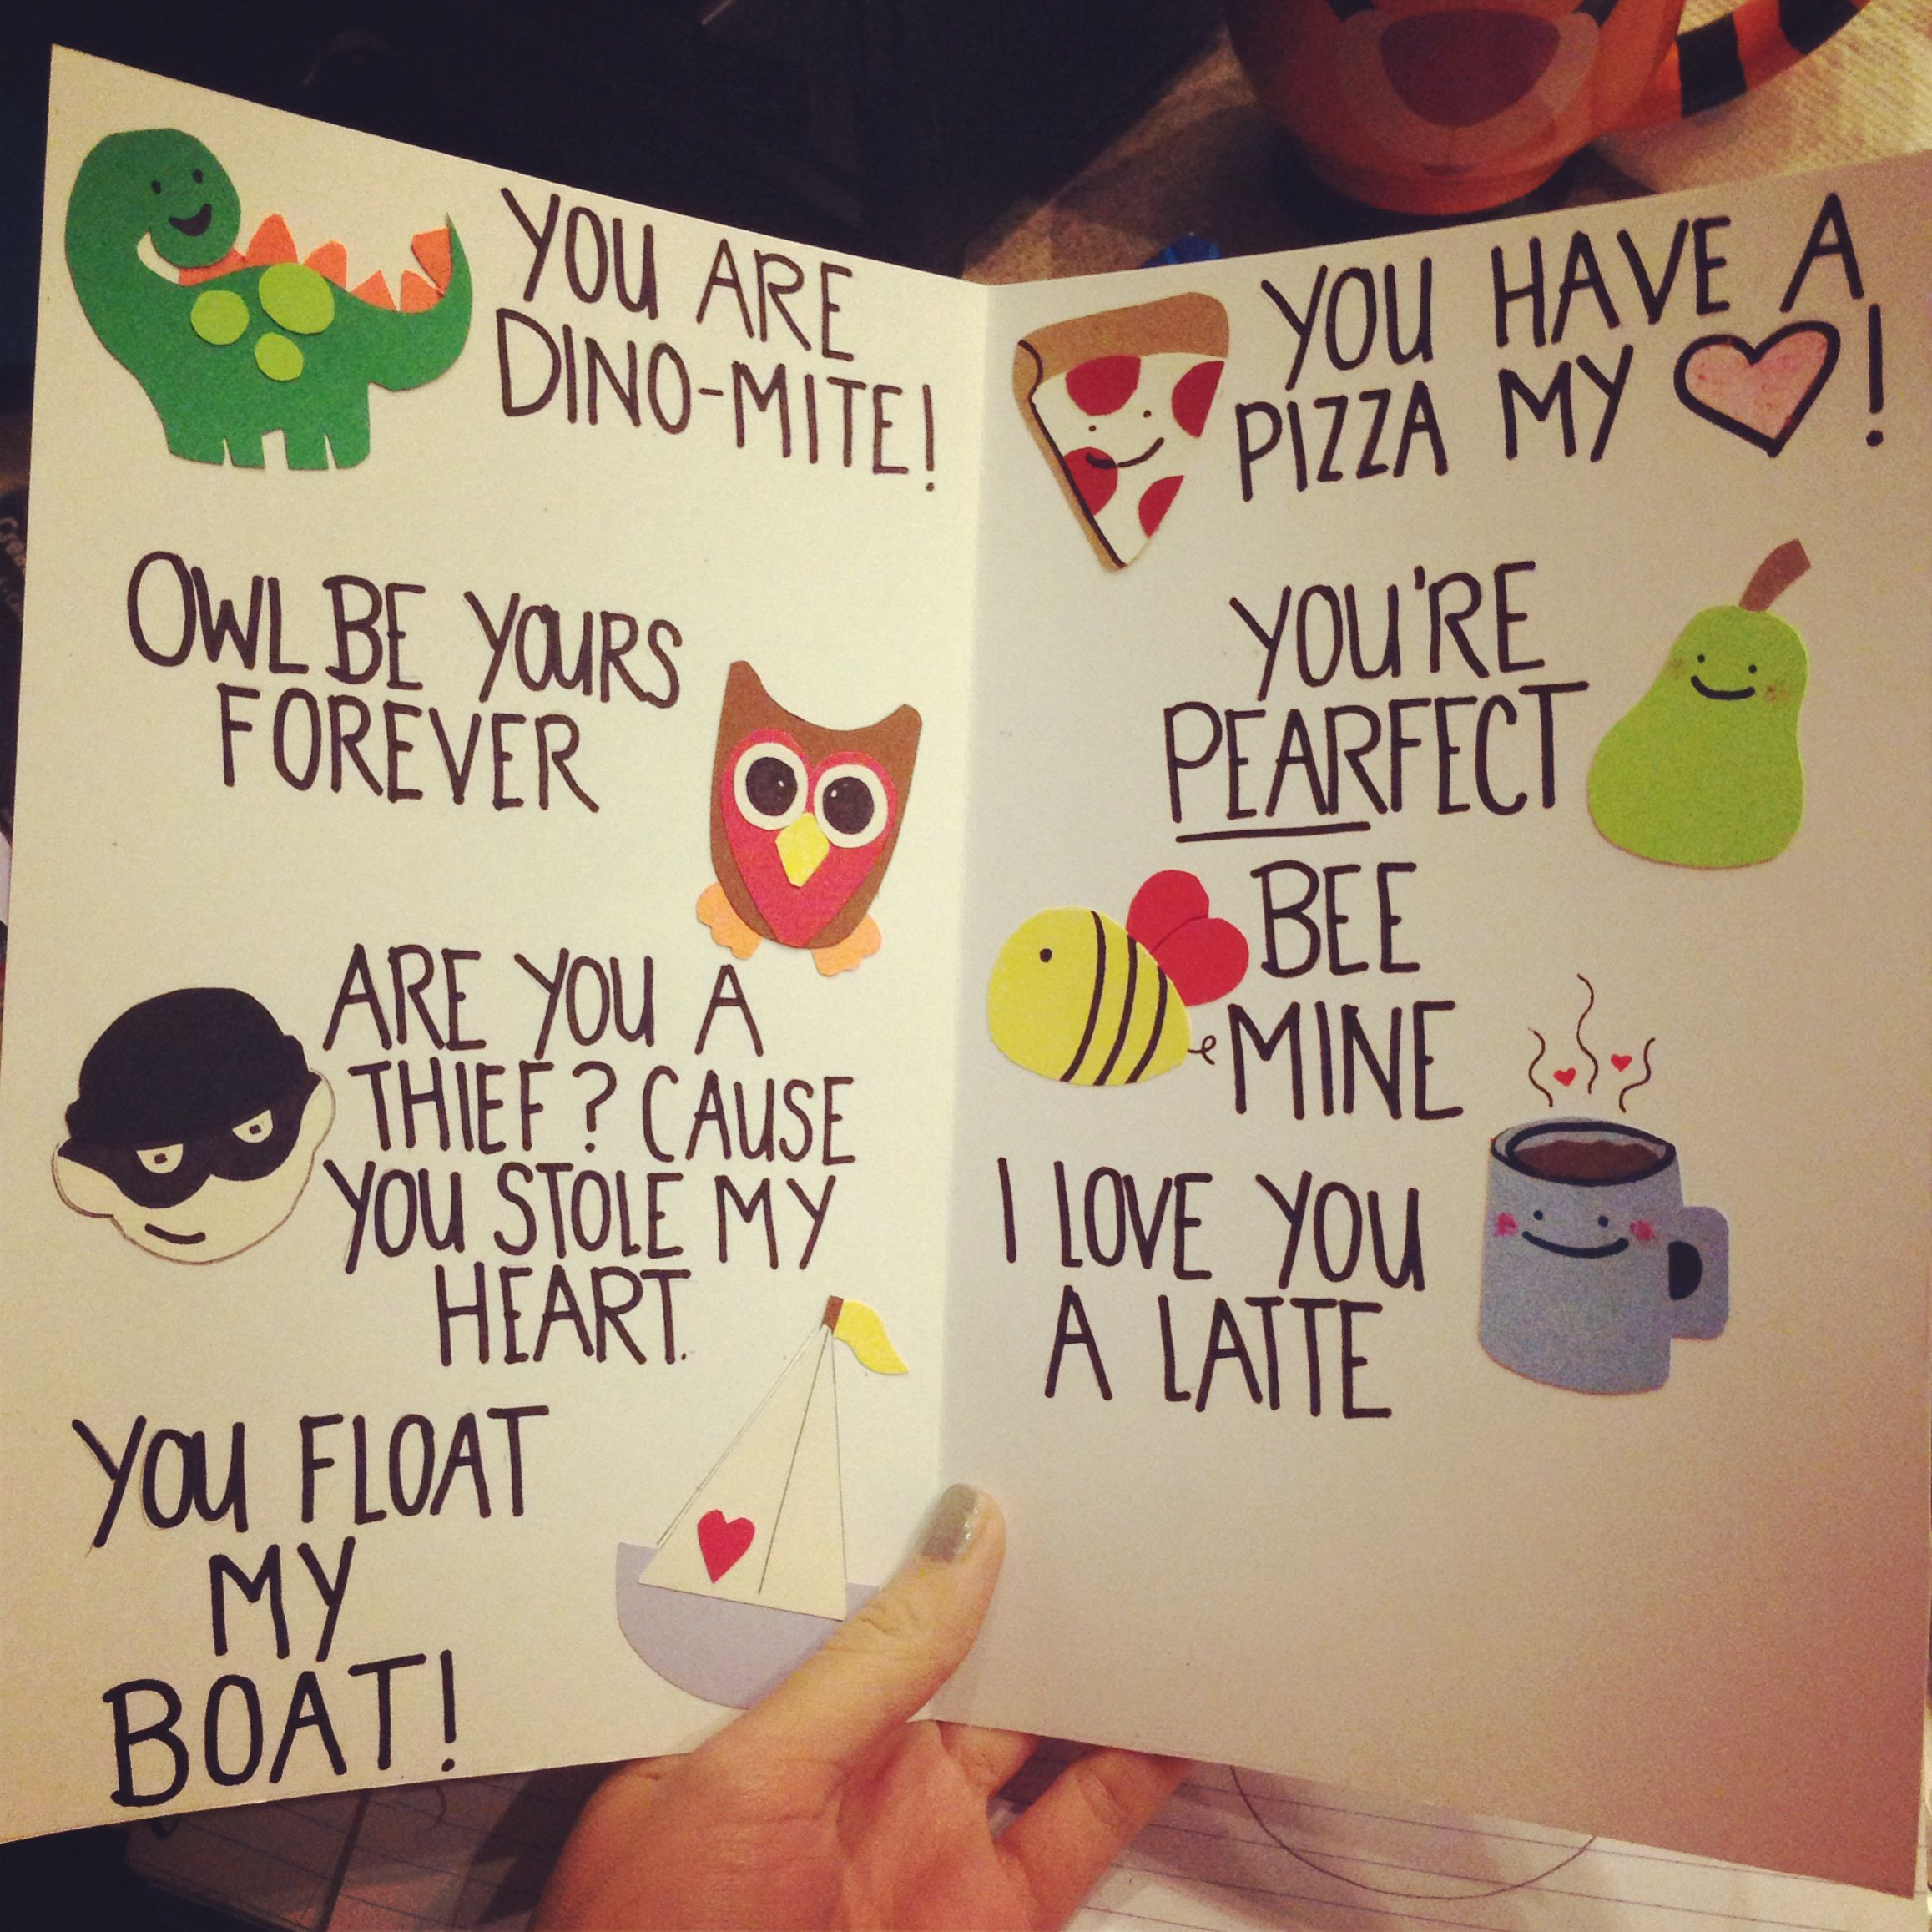 Cheesy Valentines Day Quotes
 The cheesy Valentine s Day card I made